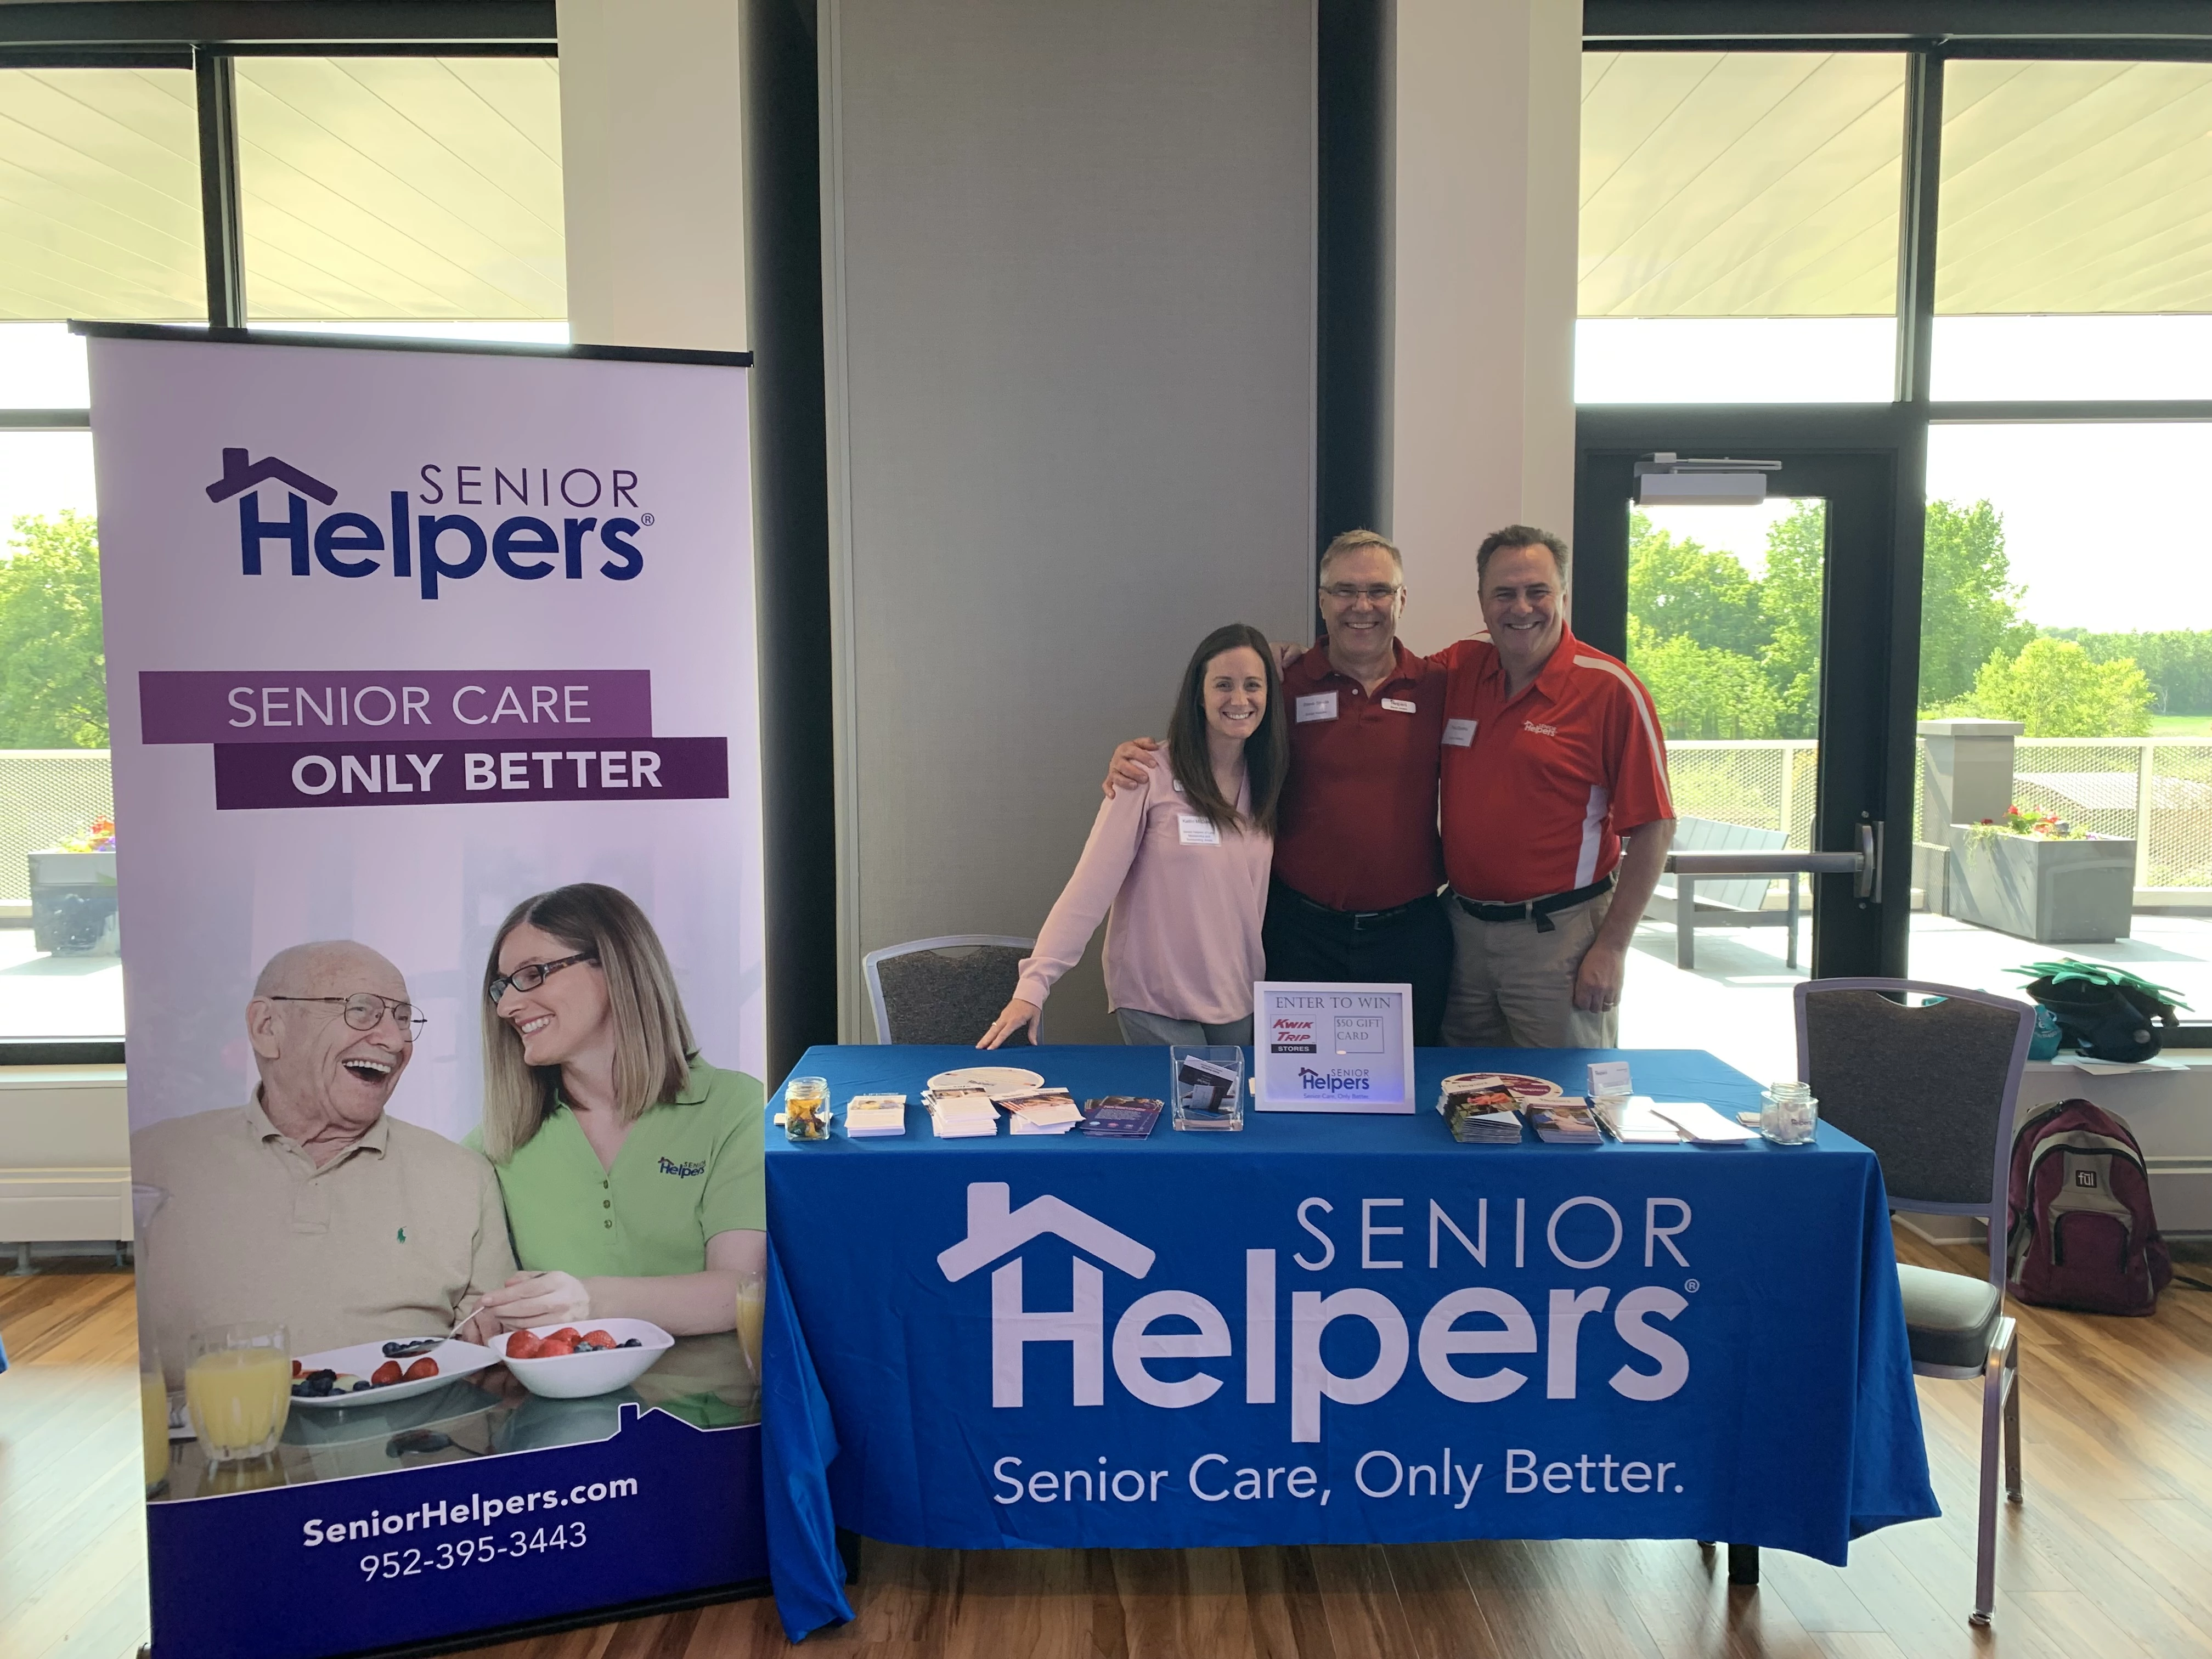 Minnesota Senior Helpers owners at the Minneapolis Senior Workers Association Spring Soirée at the Plymouth Community Center